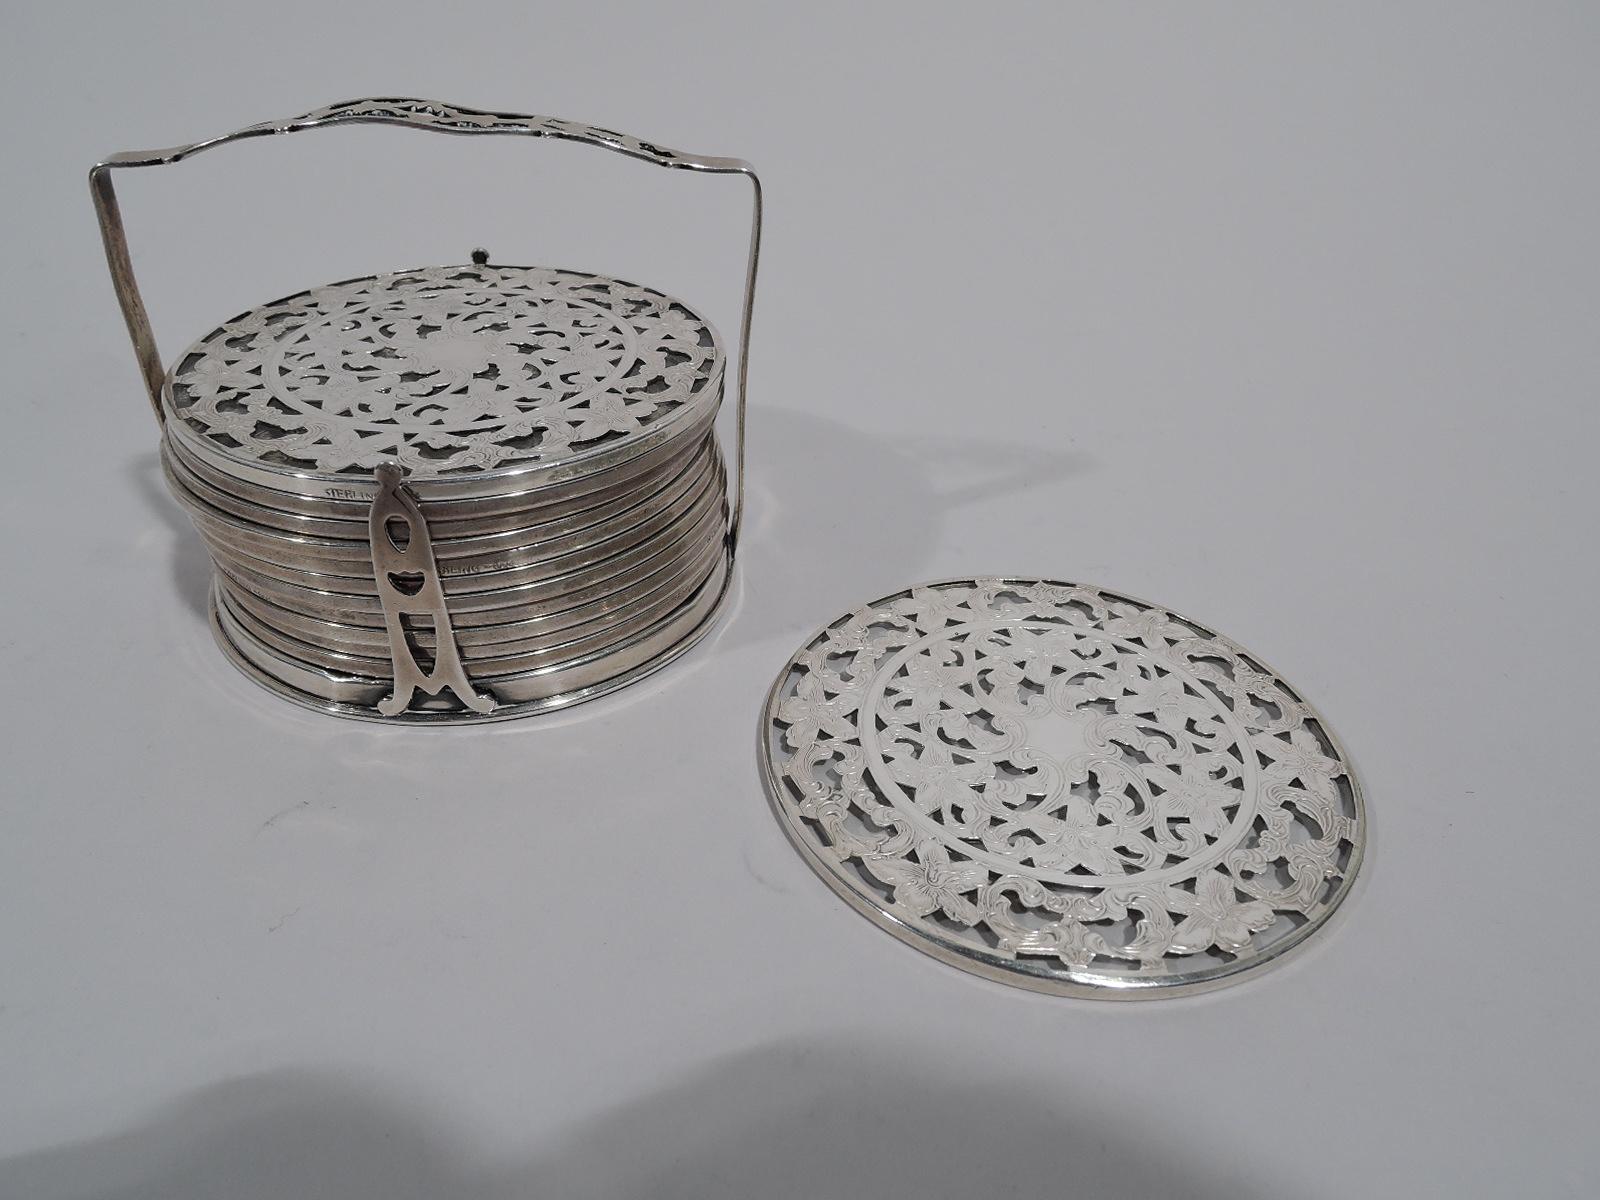 Twelve turn-of-the-century Art Nouveau glass coasters with engraved silver overlay on stand. Made by Webster in North Attleboro. Each coaster: Flat and circular, central cartouche (vacant) surrounded by dense scrolls and flowers; border same. Glass